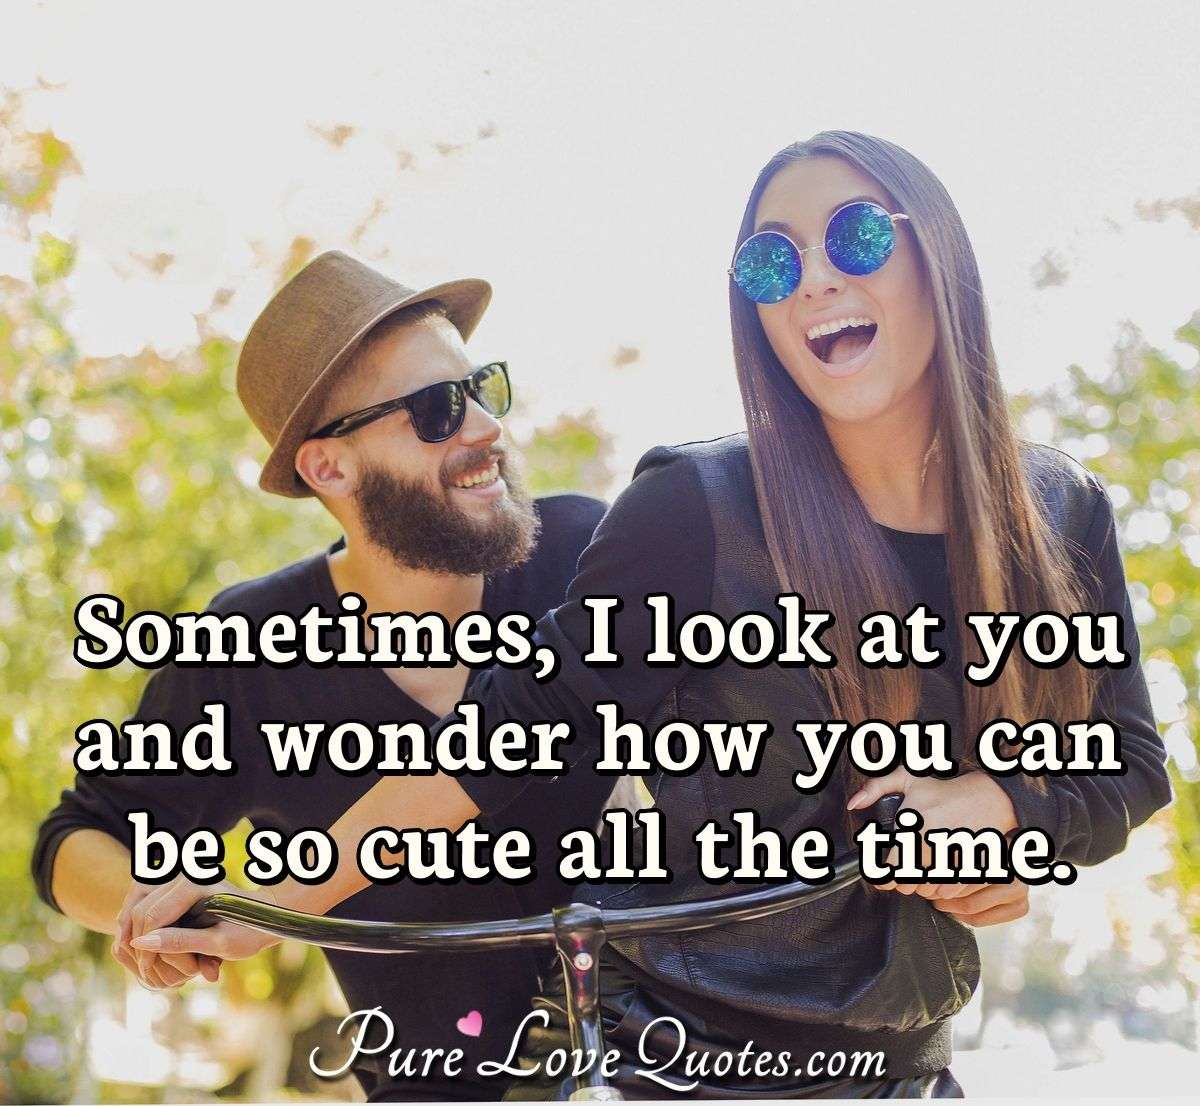 Sometimes, I look at you and wonder how you can be so cute all the time. - Anonymous